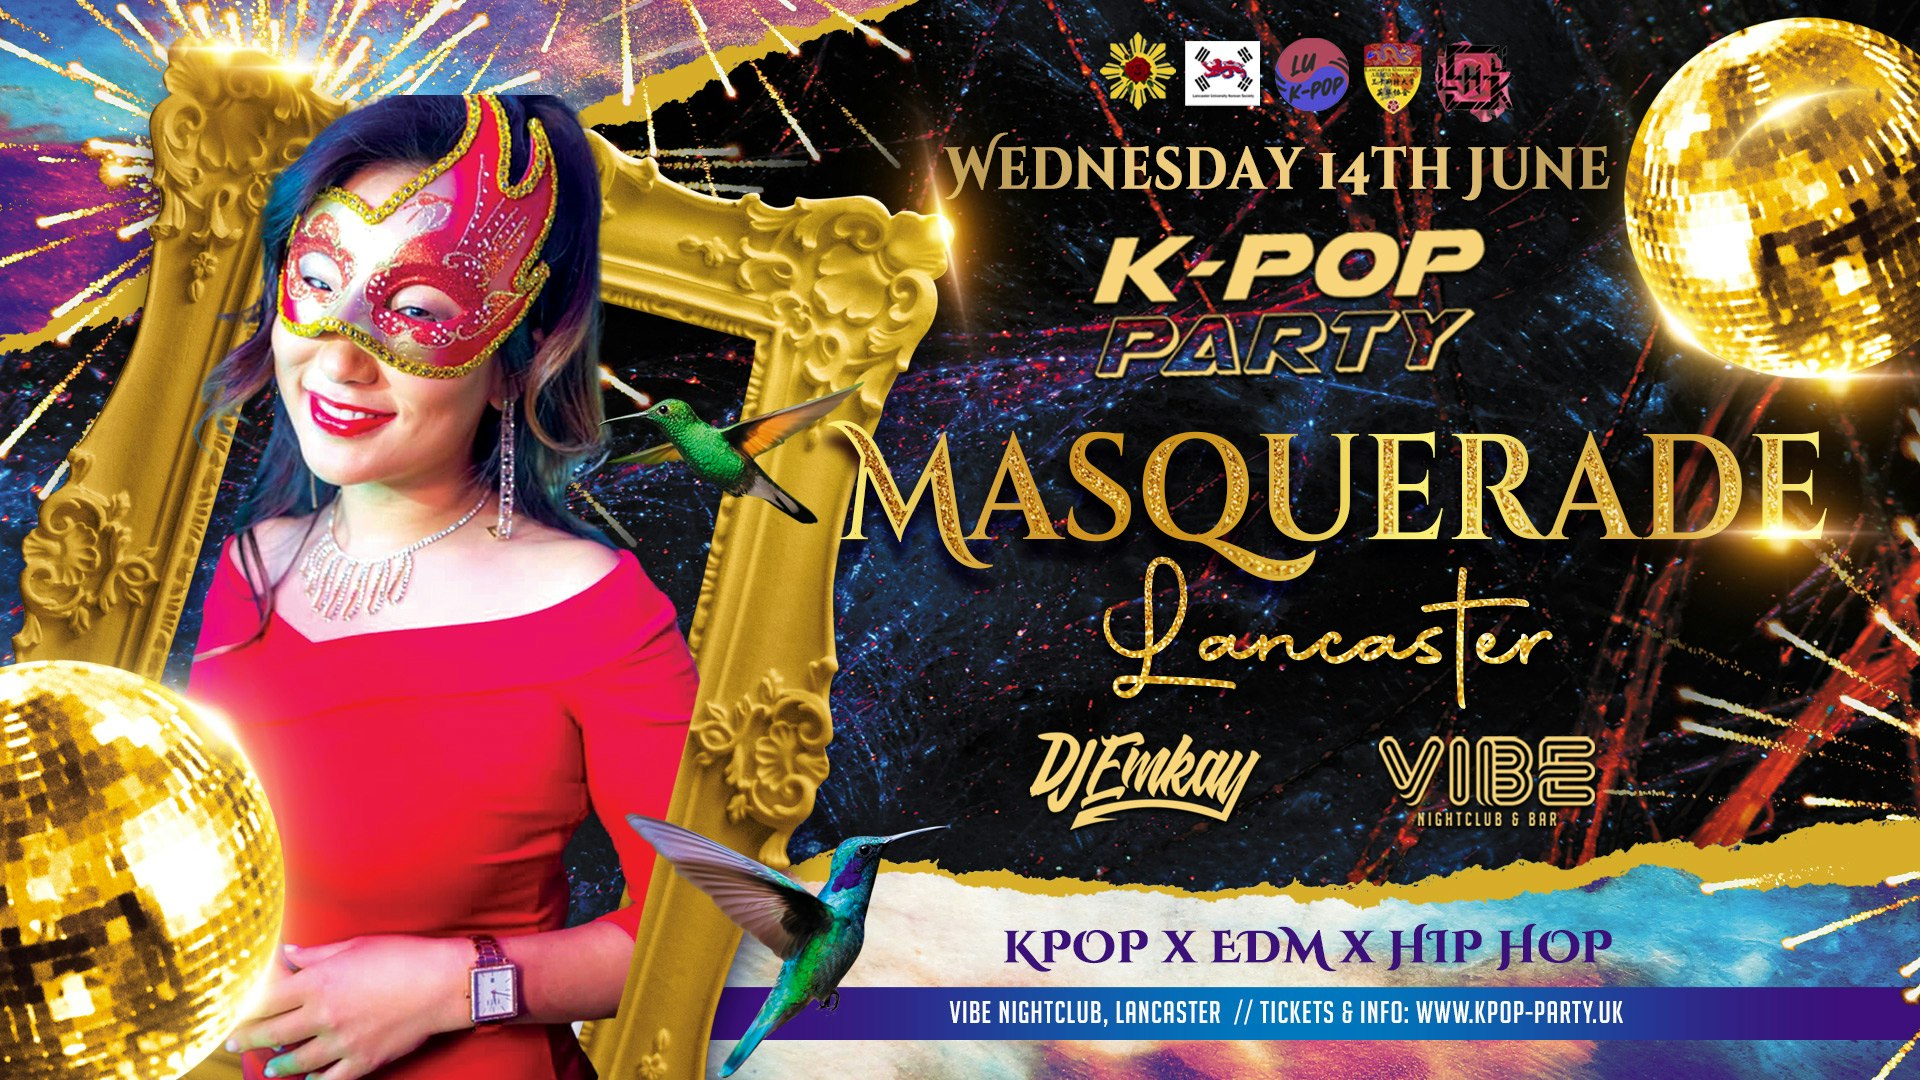 K-Pop Masquerade Party Lancaster – with DJ EMKAY | Wednesday 14th June